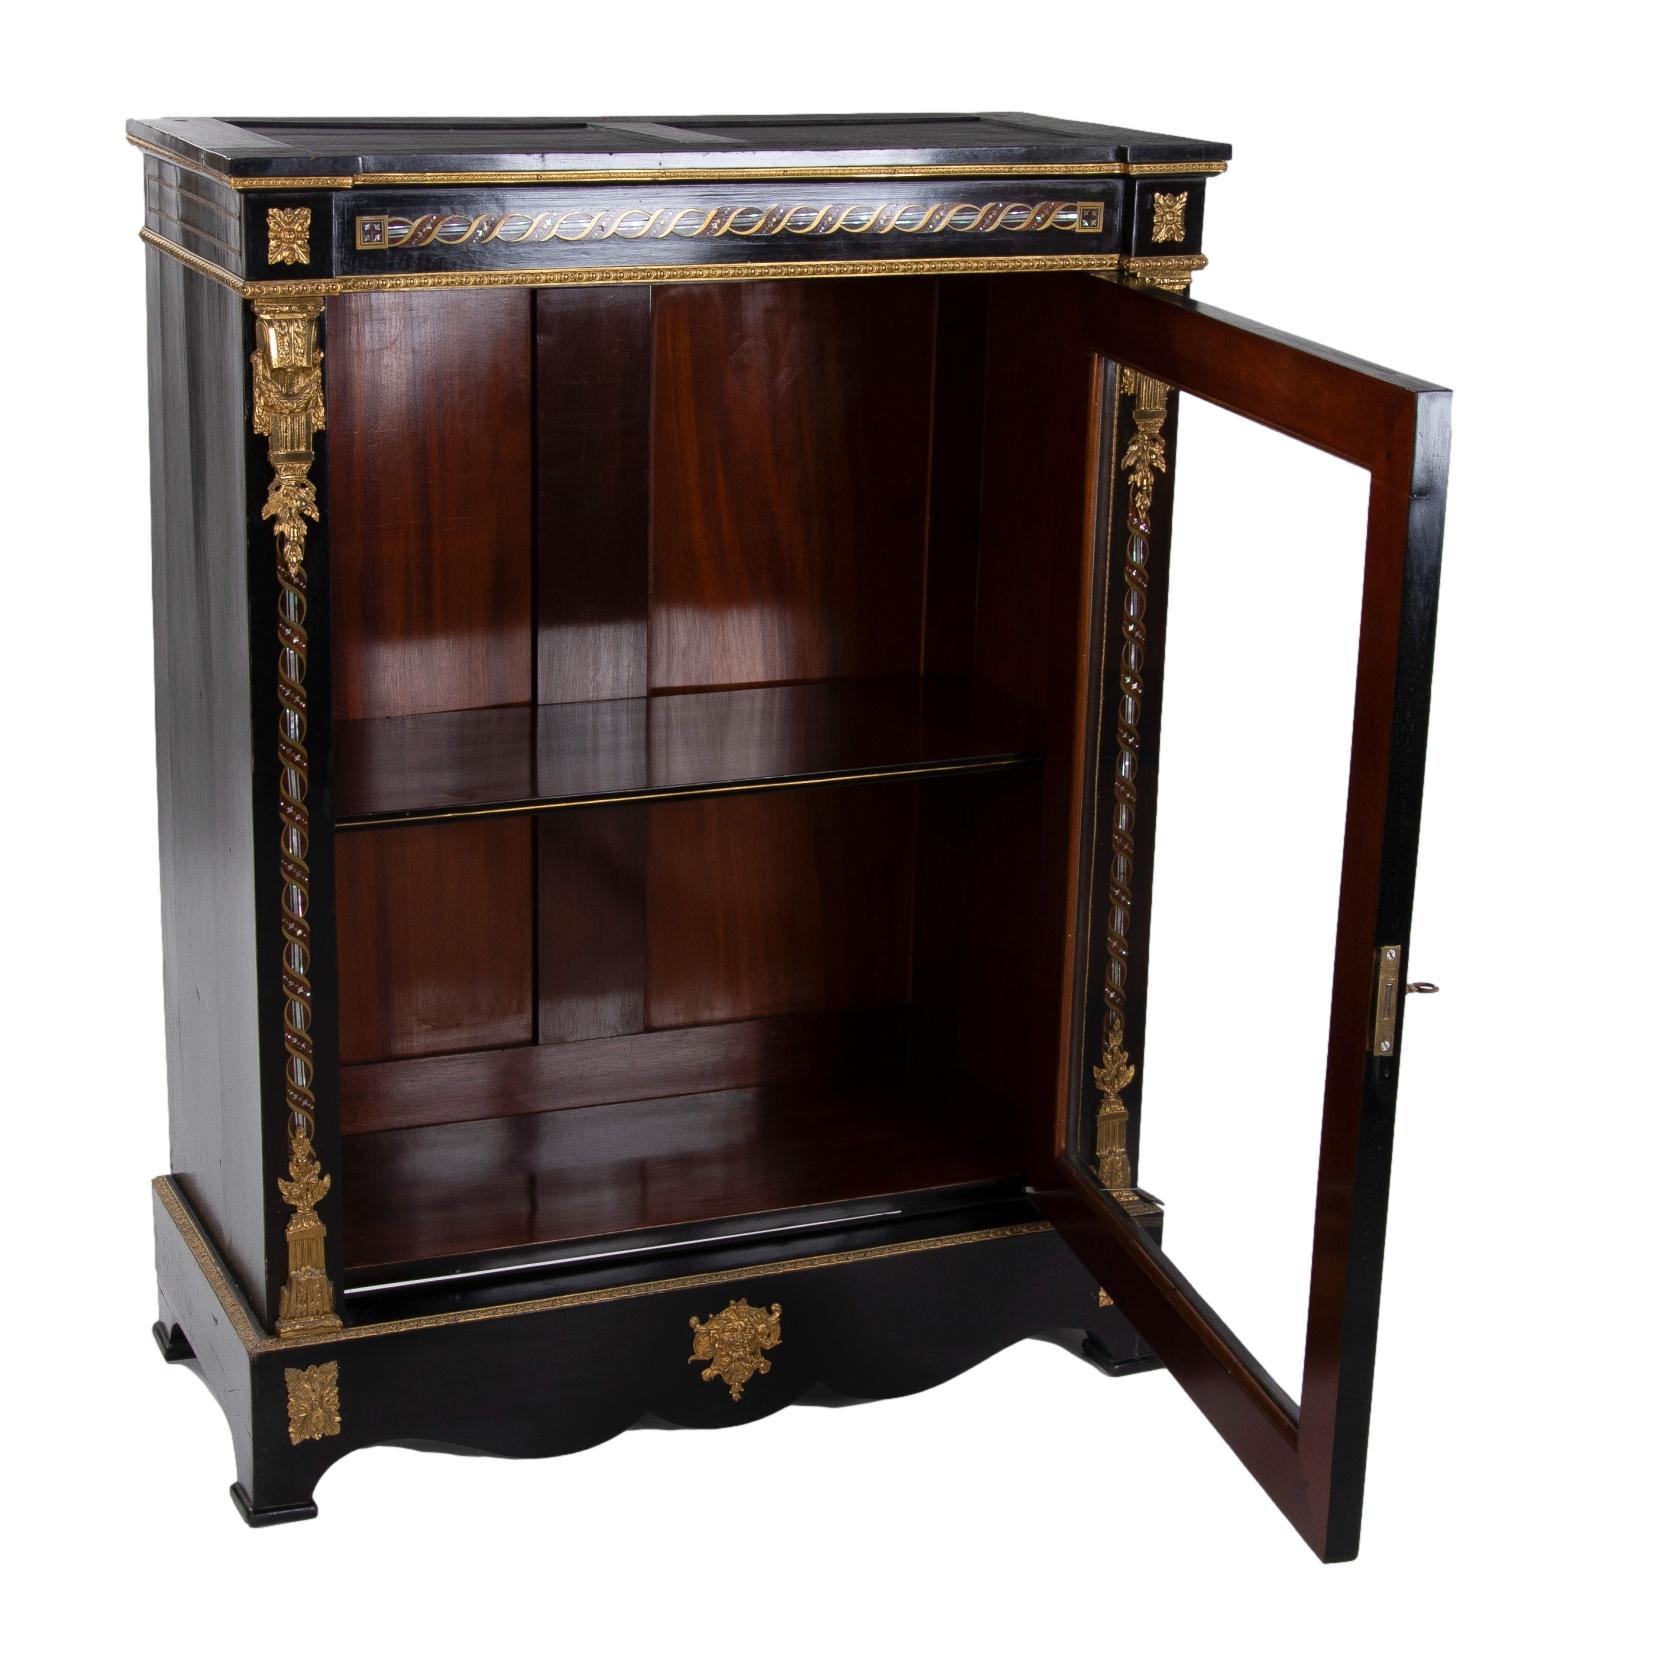 1850s French Ebonized Wood Pier Cabinet w/ Gilt Bronze & Mother of Pearl Inlay For Sale 1